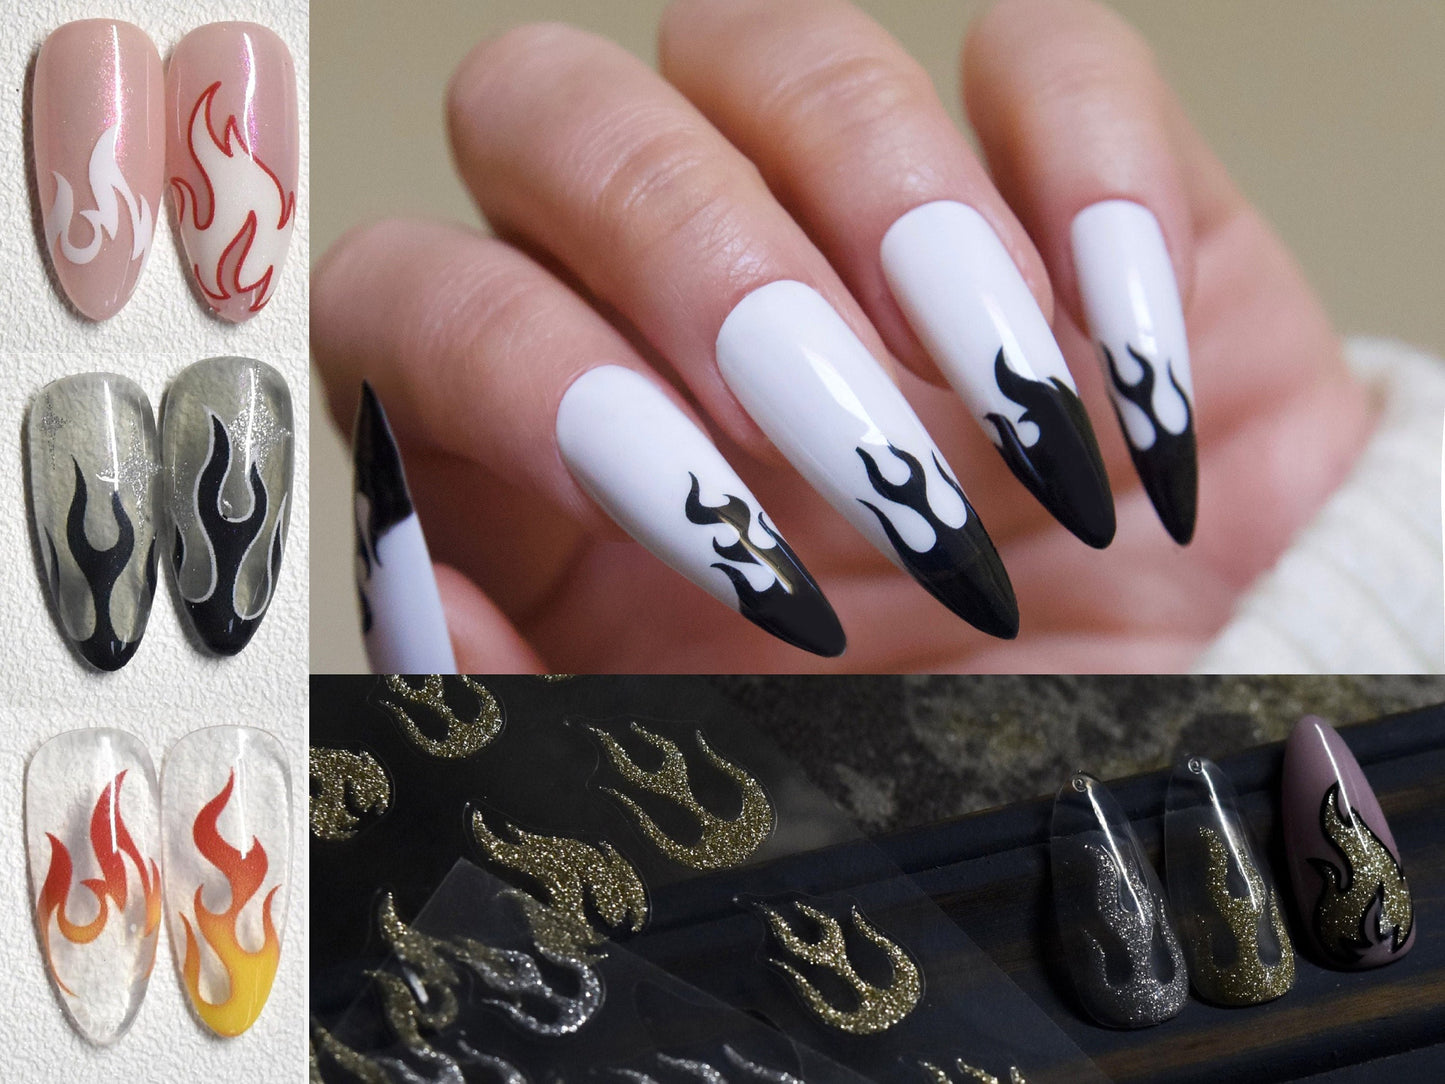 Flame Nail Art Stickers/Nail Decals Acrylic Nail Art Supplies Self Adhesive Decals/ 3D Red Gold SilverFire Peel off Manicure decals